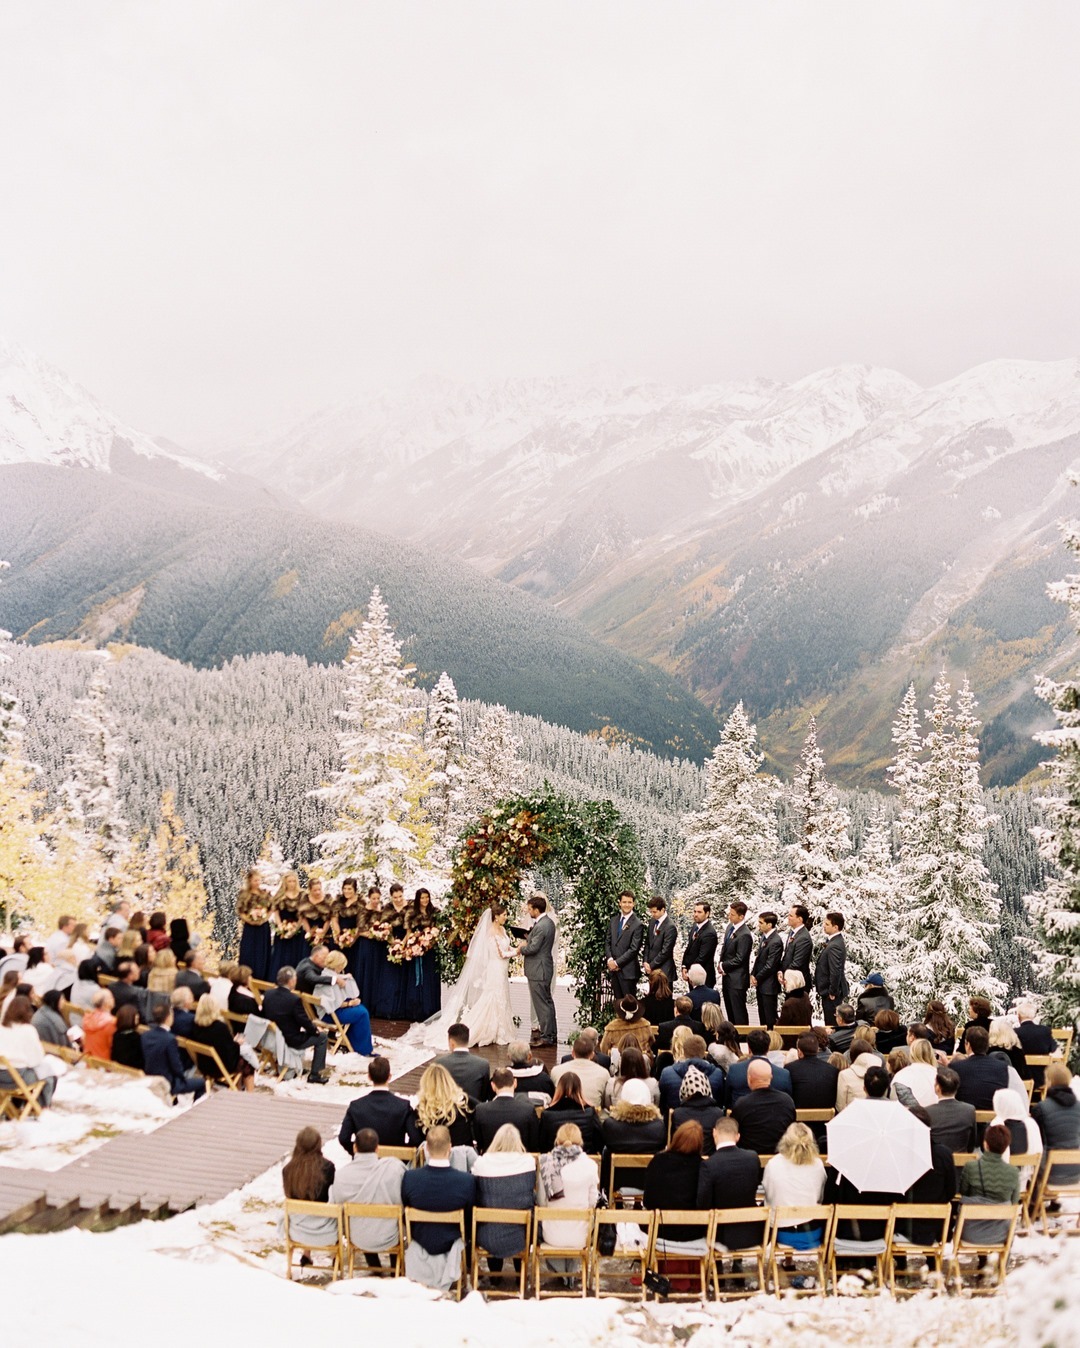 These Are the Winter Wedding Trends We're Seeing Everywhere026